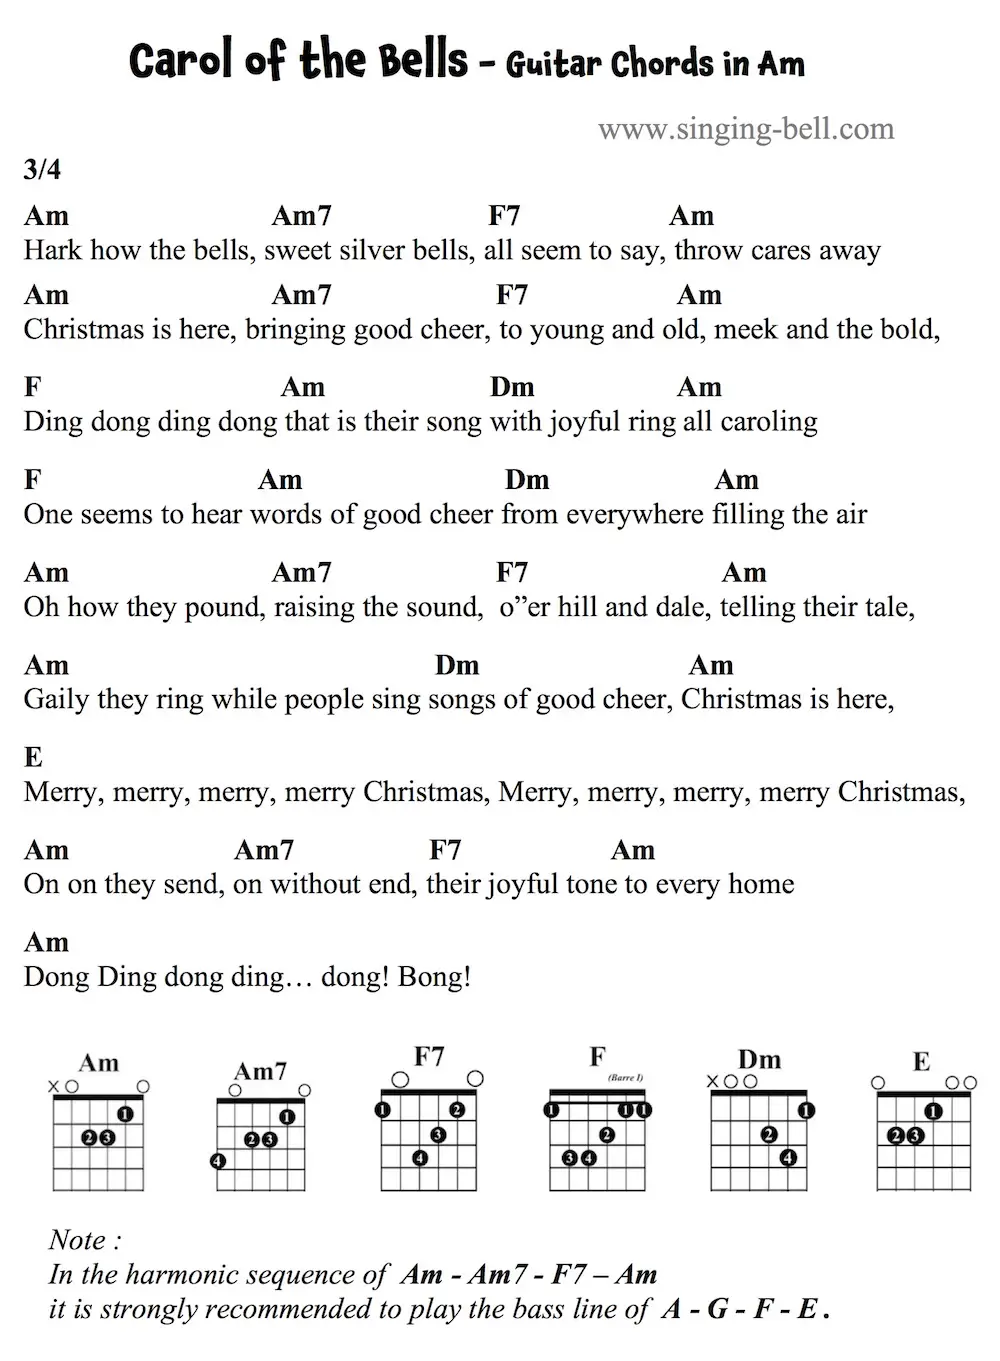 Carol of the bells Guitar chords and tabs in Am.